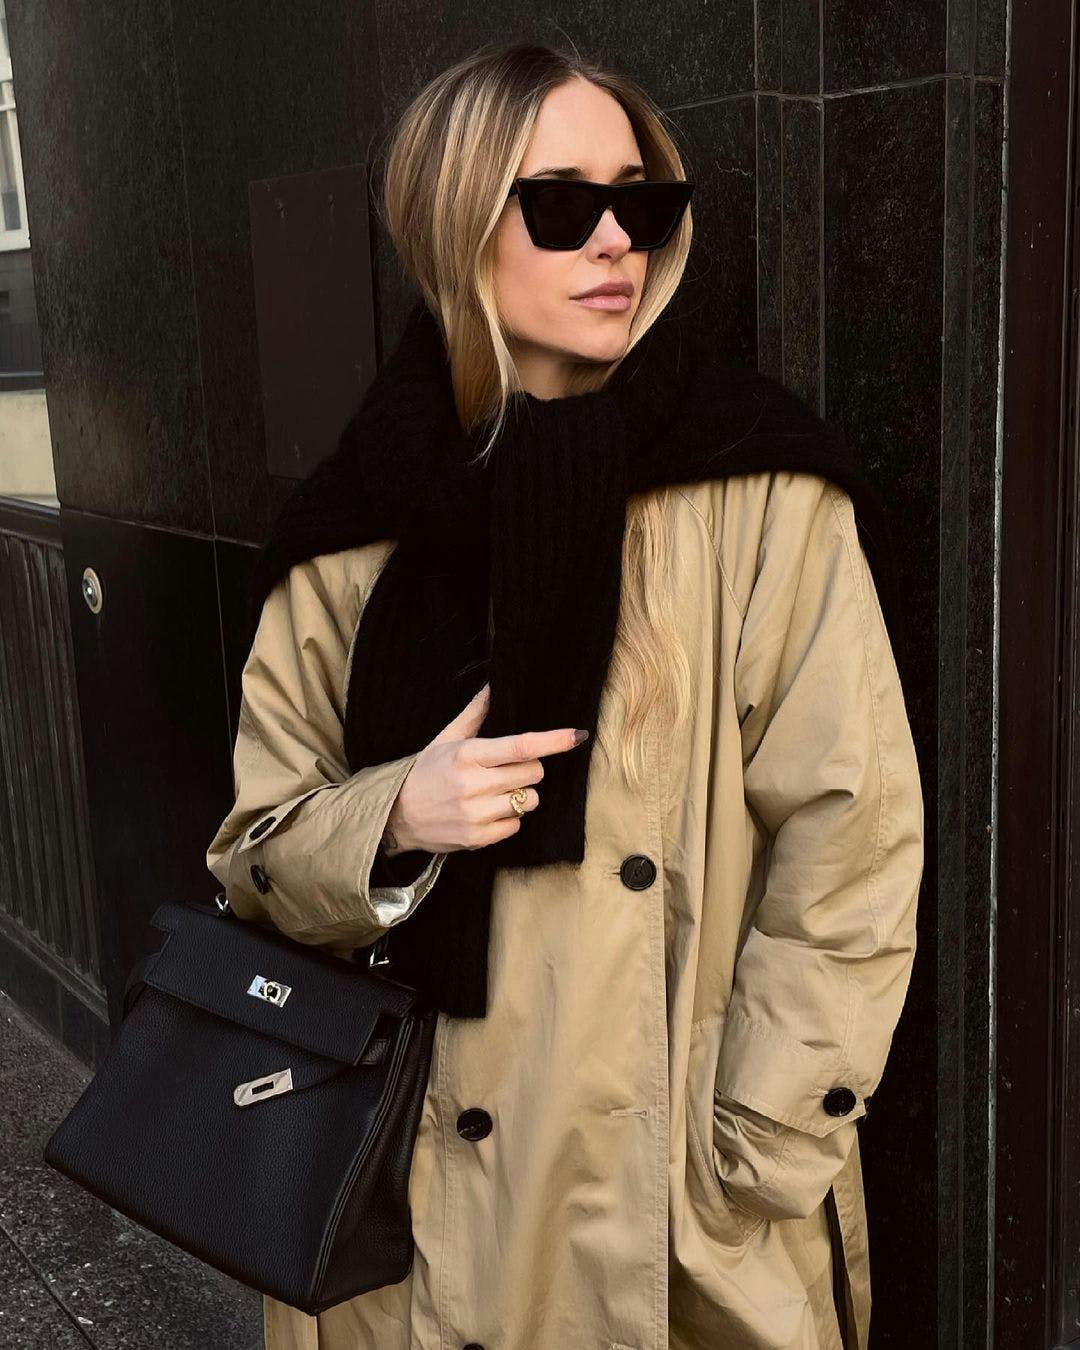 clothing apparel overcoat coat sunglasses accessories accessory trench coat person human